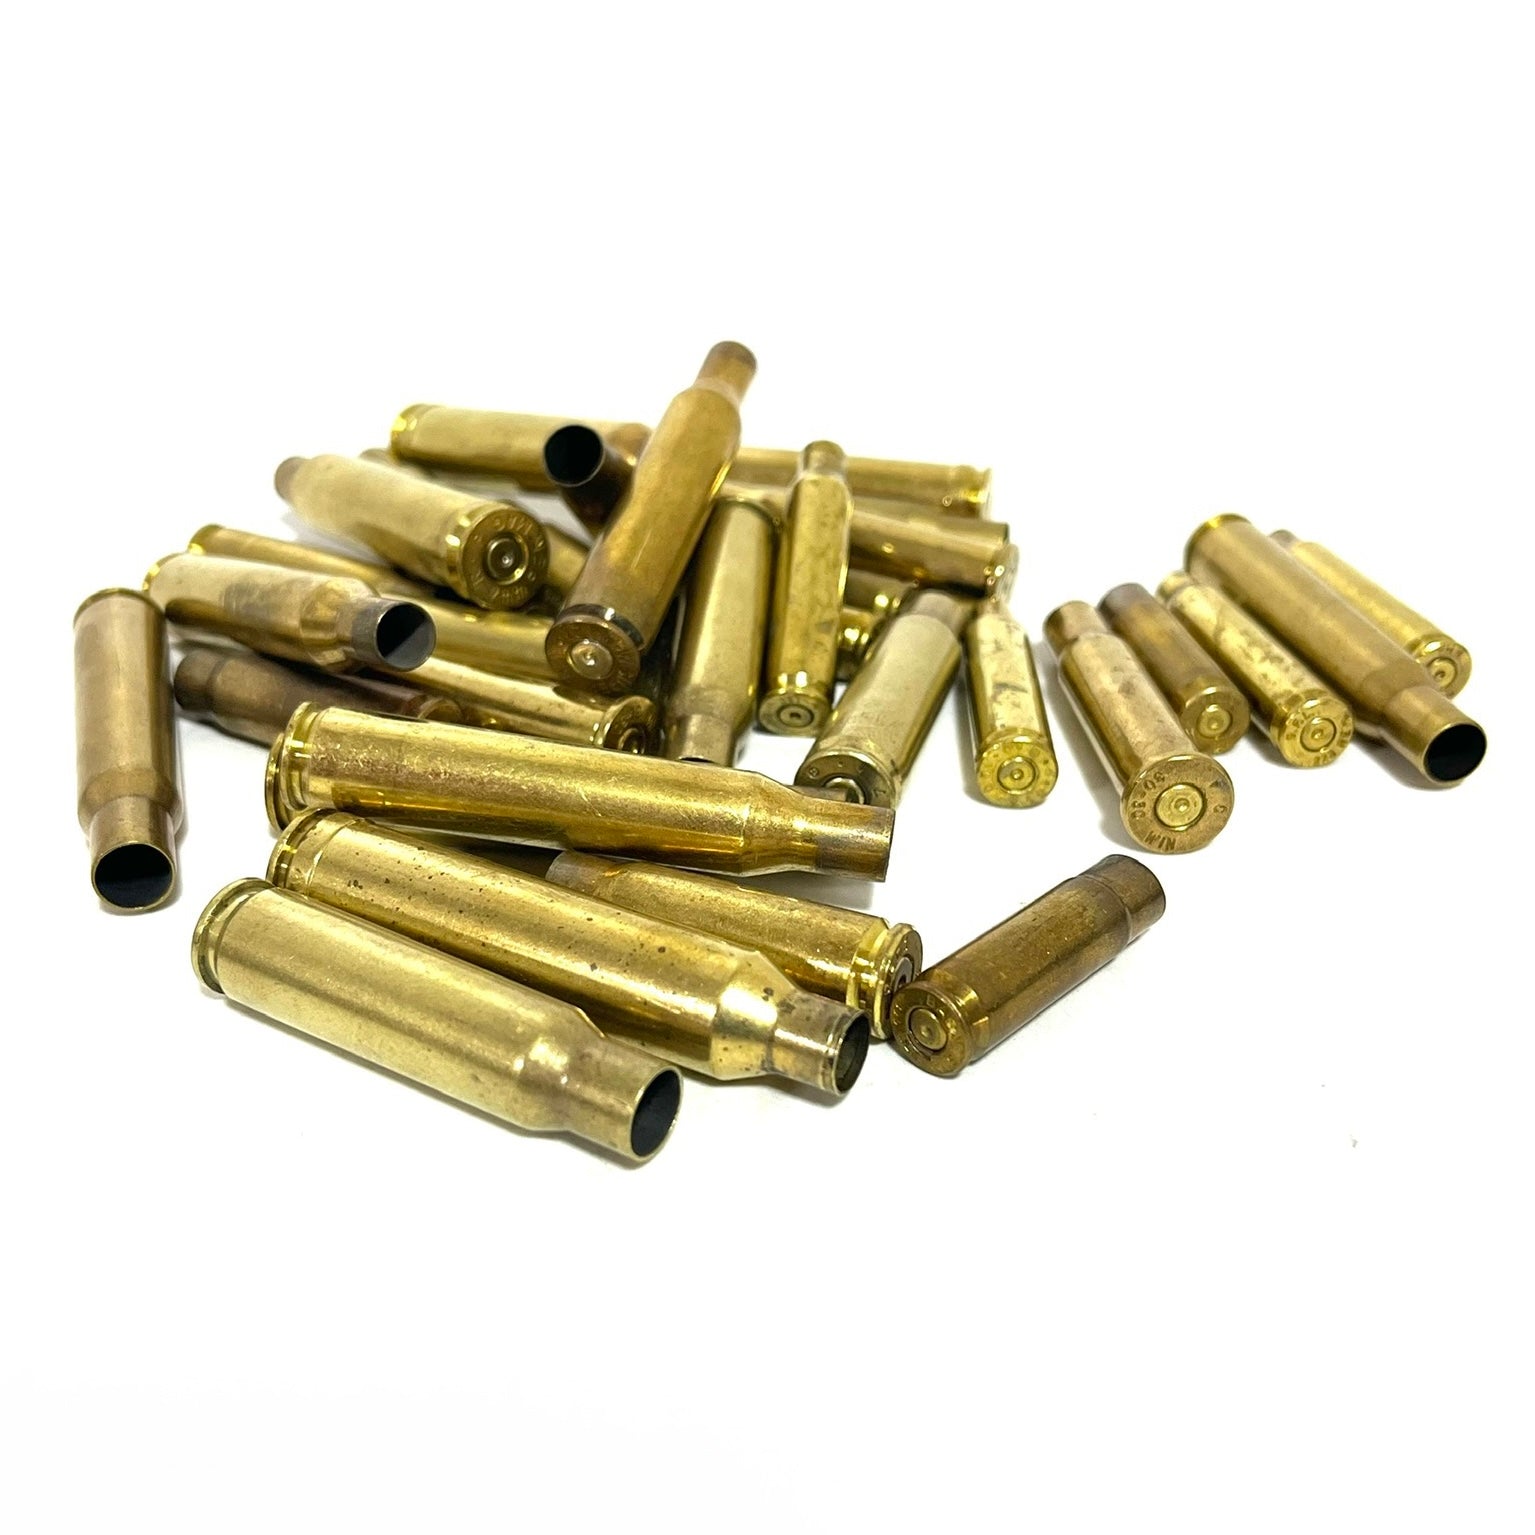 Mixed Spent Bullet Casings Once Fired 9MM 223 40 45 38 357 7.62x39